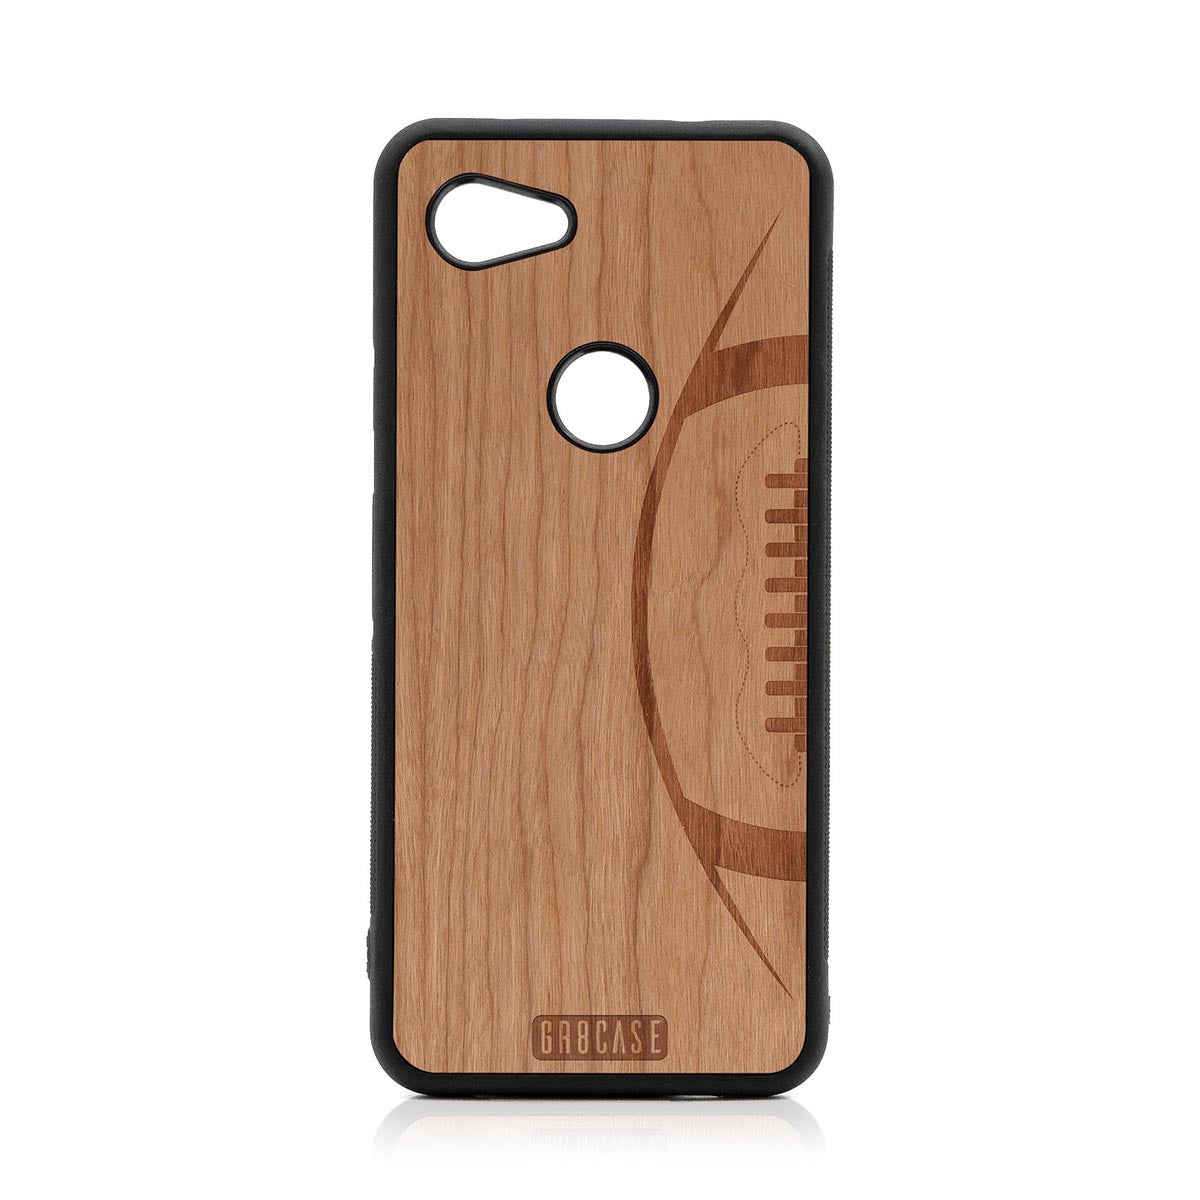 Football Design Wood Case For Google Pixel 3A XL by GR8CASE